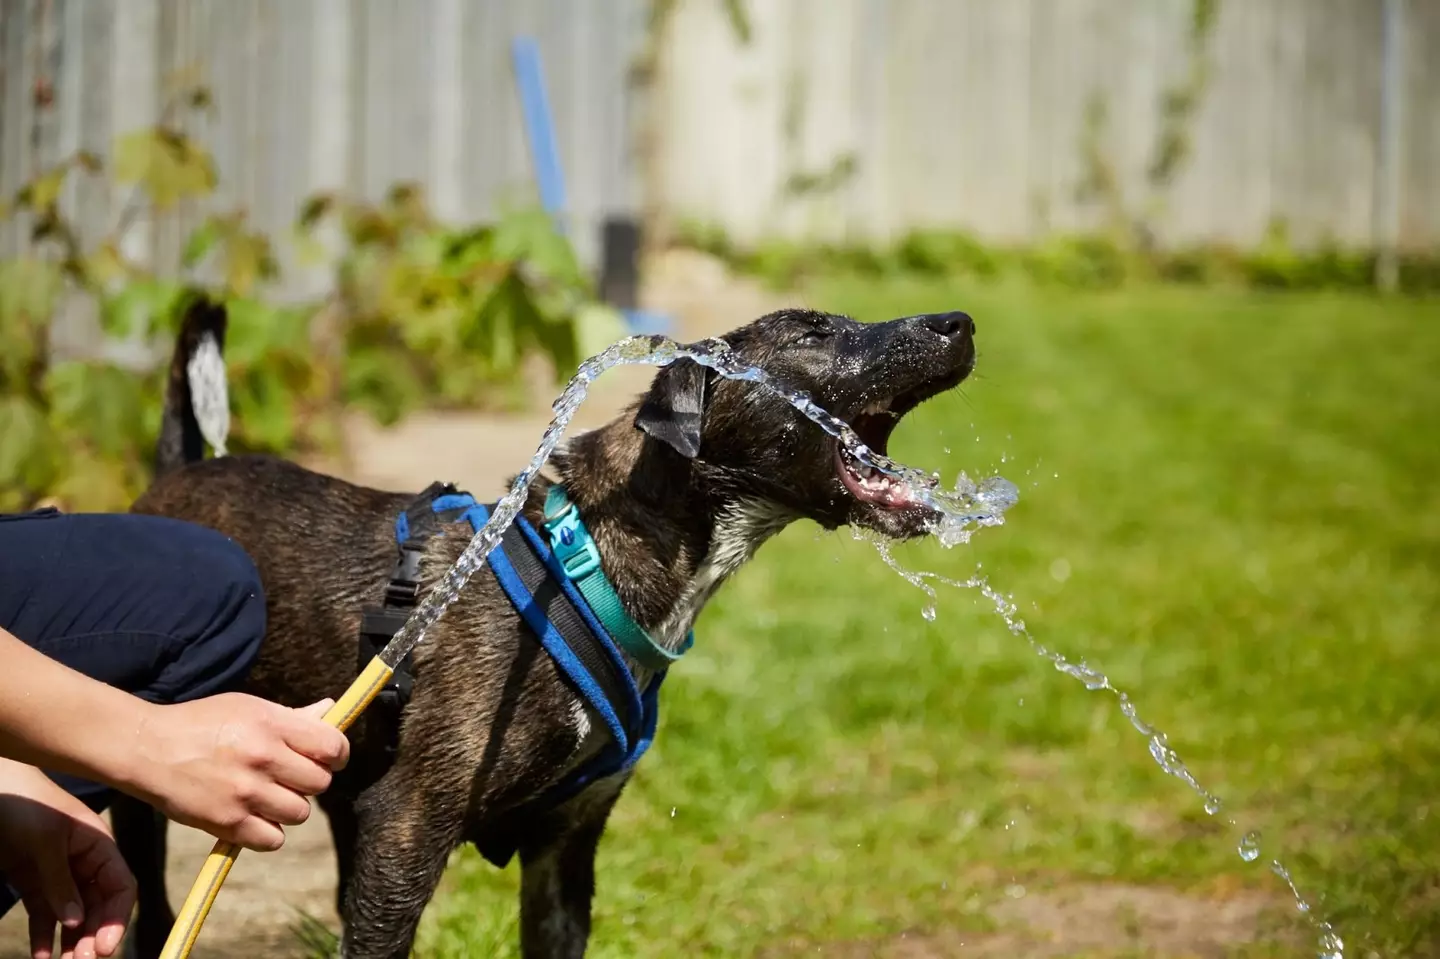 RSPCA Millbrook Animal Centre in Surrey have been keeping Nala cool by playing with the hose (